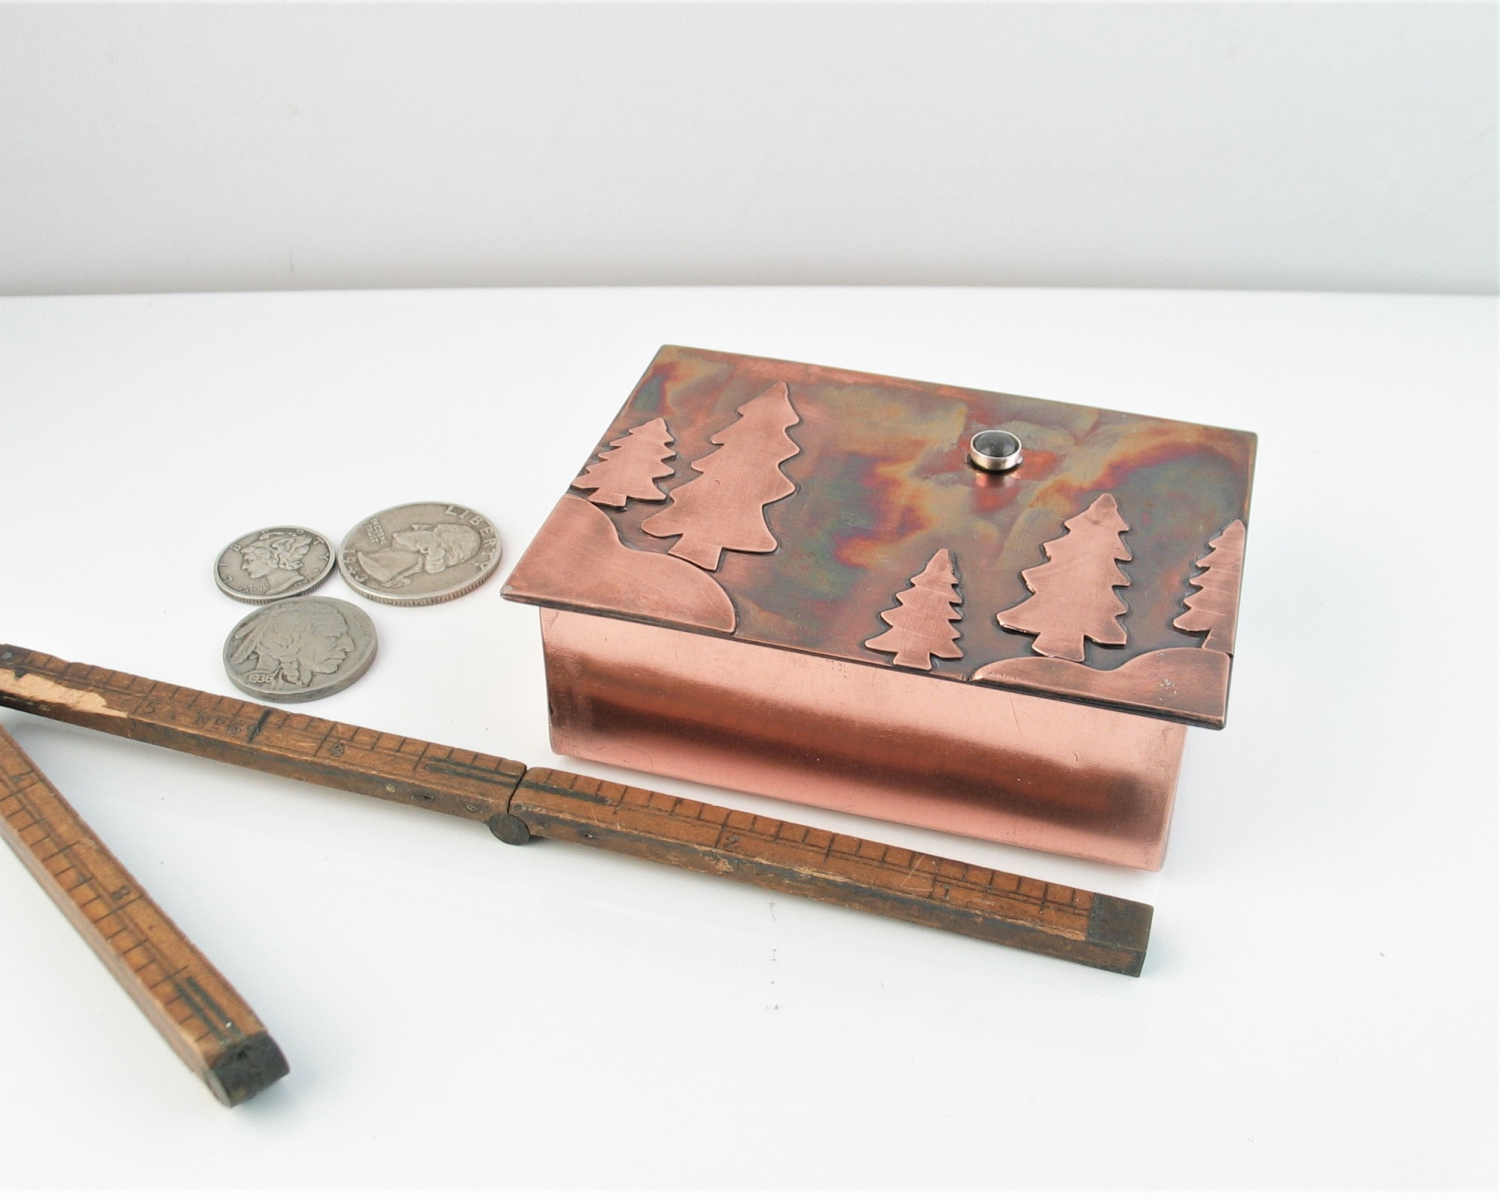 Hinge lid copper box with trees and hills on lid showing size related to common objects